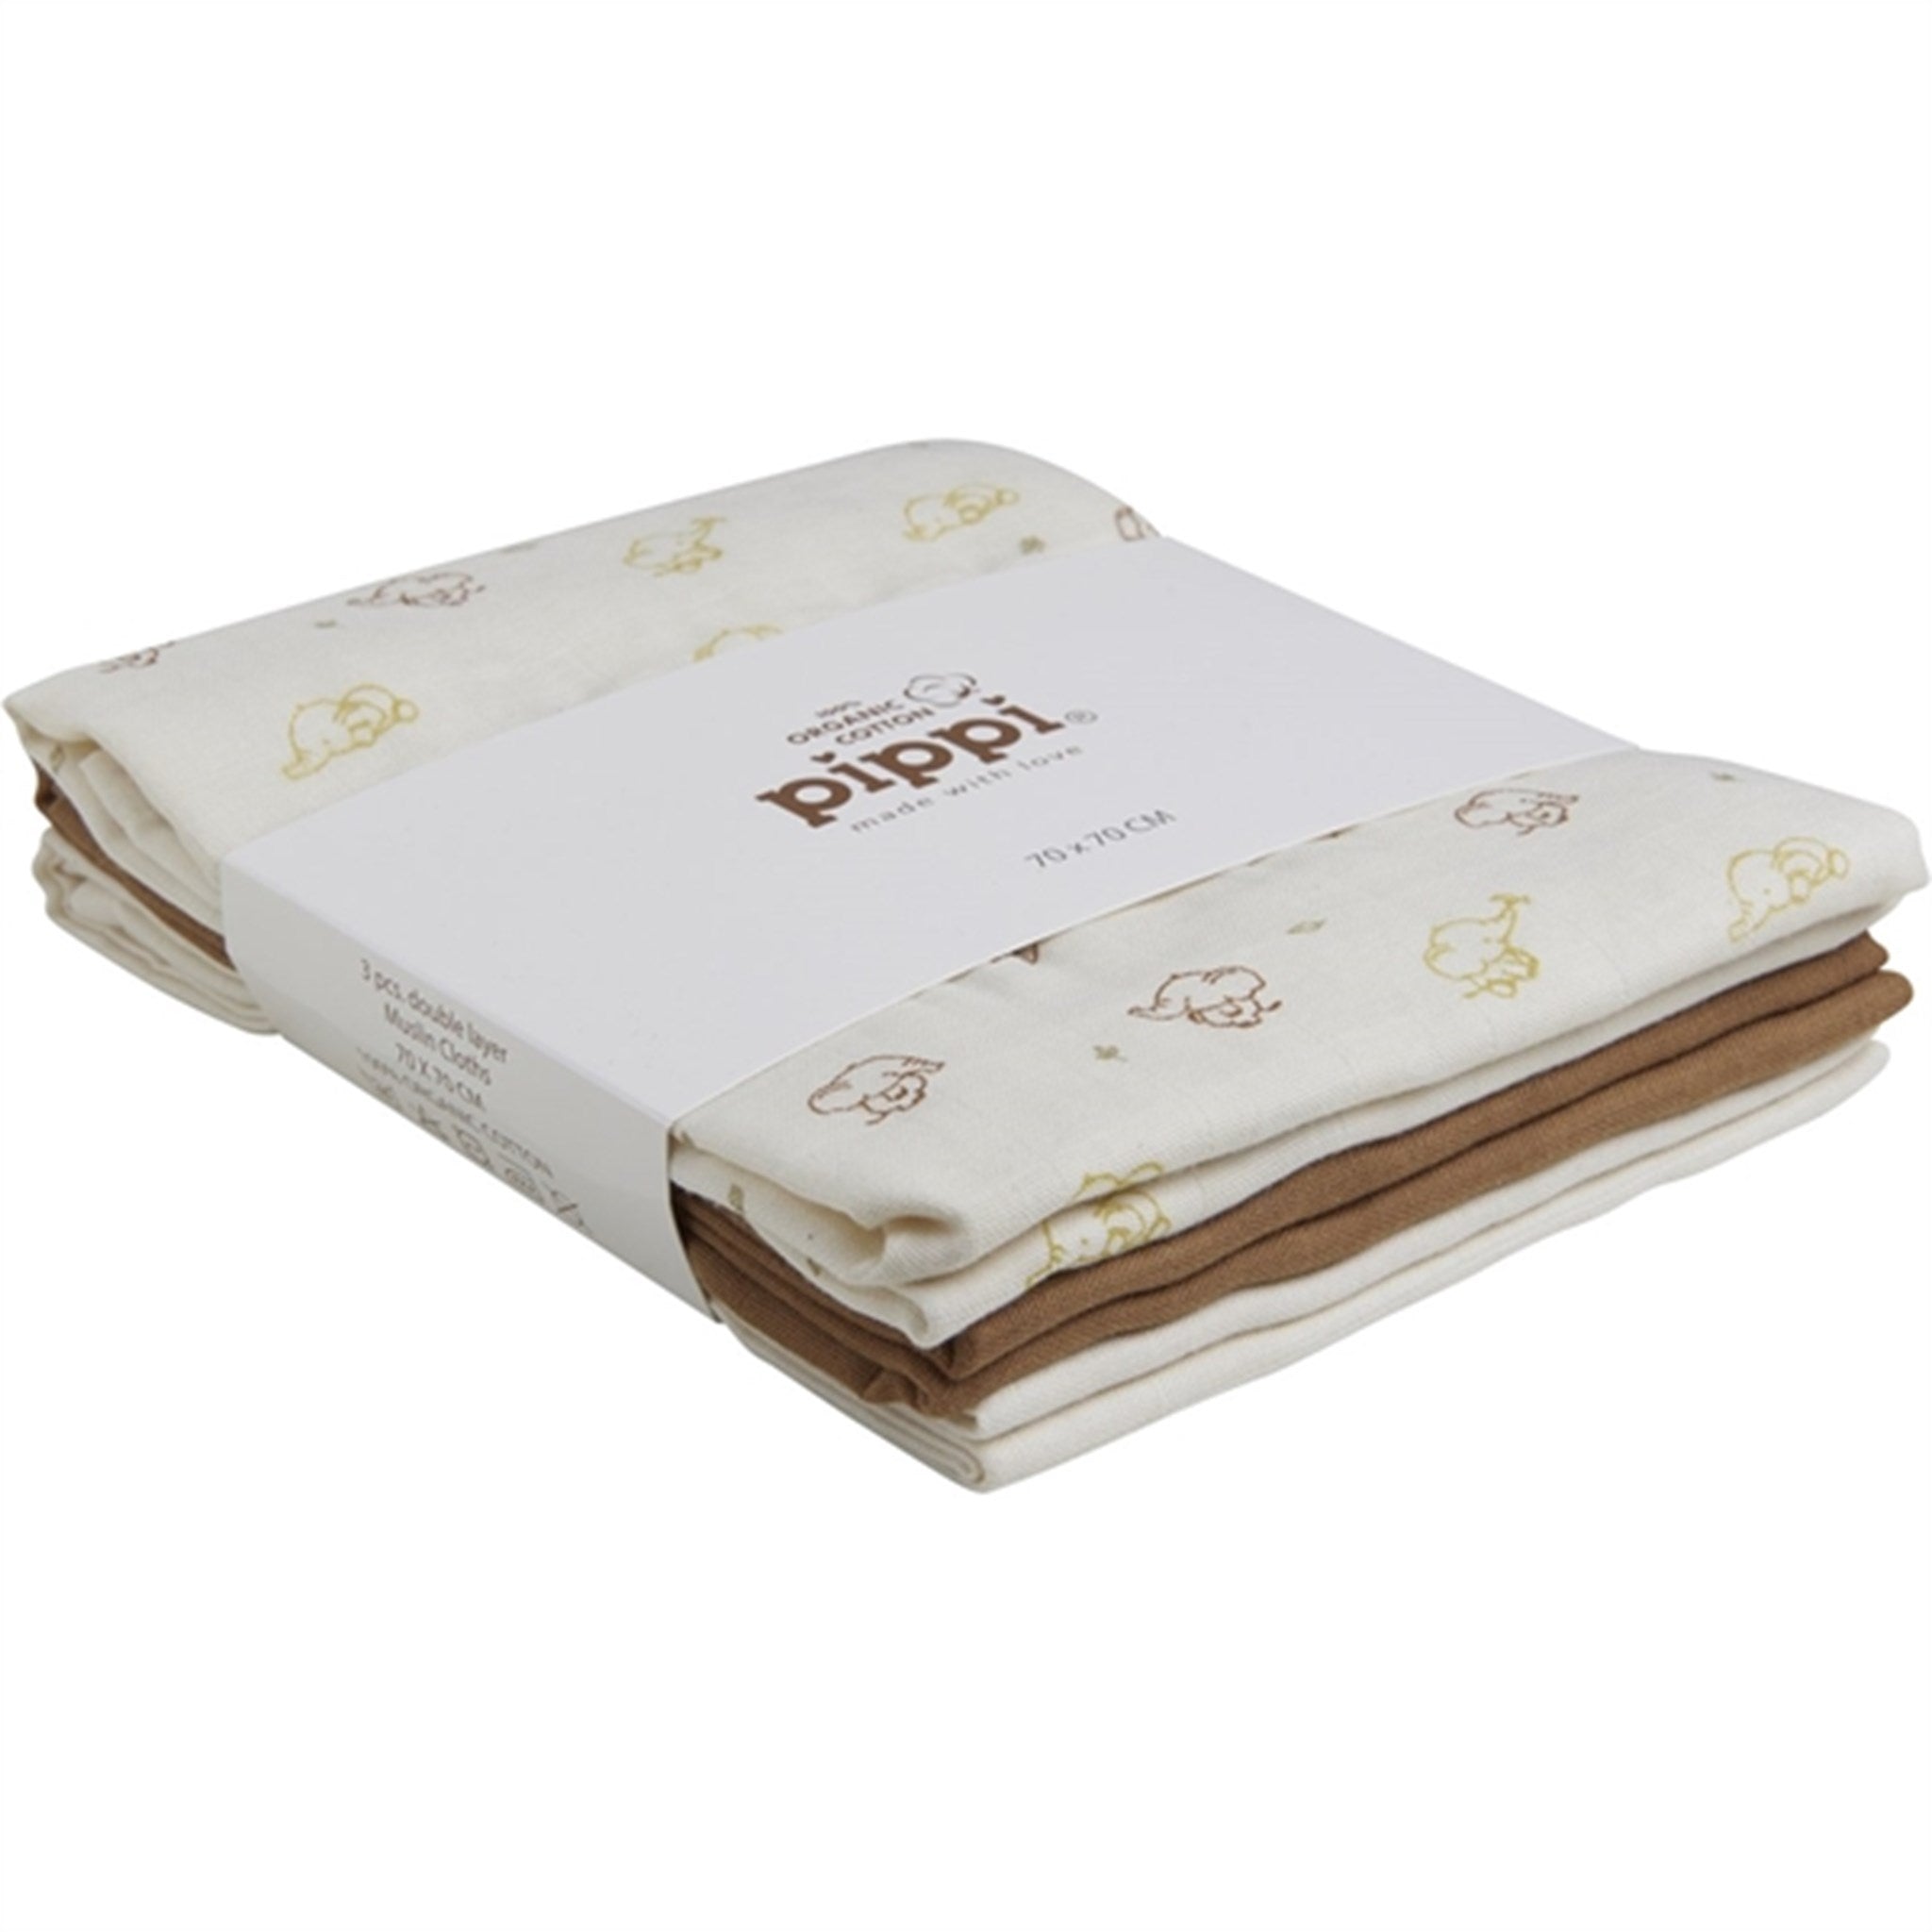 Pippi Organic Muslin Cloths 4-pack Toasted Coconut